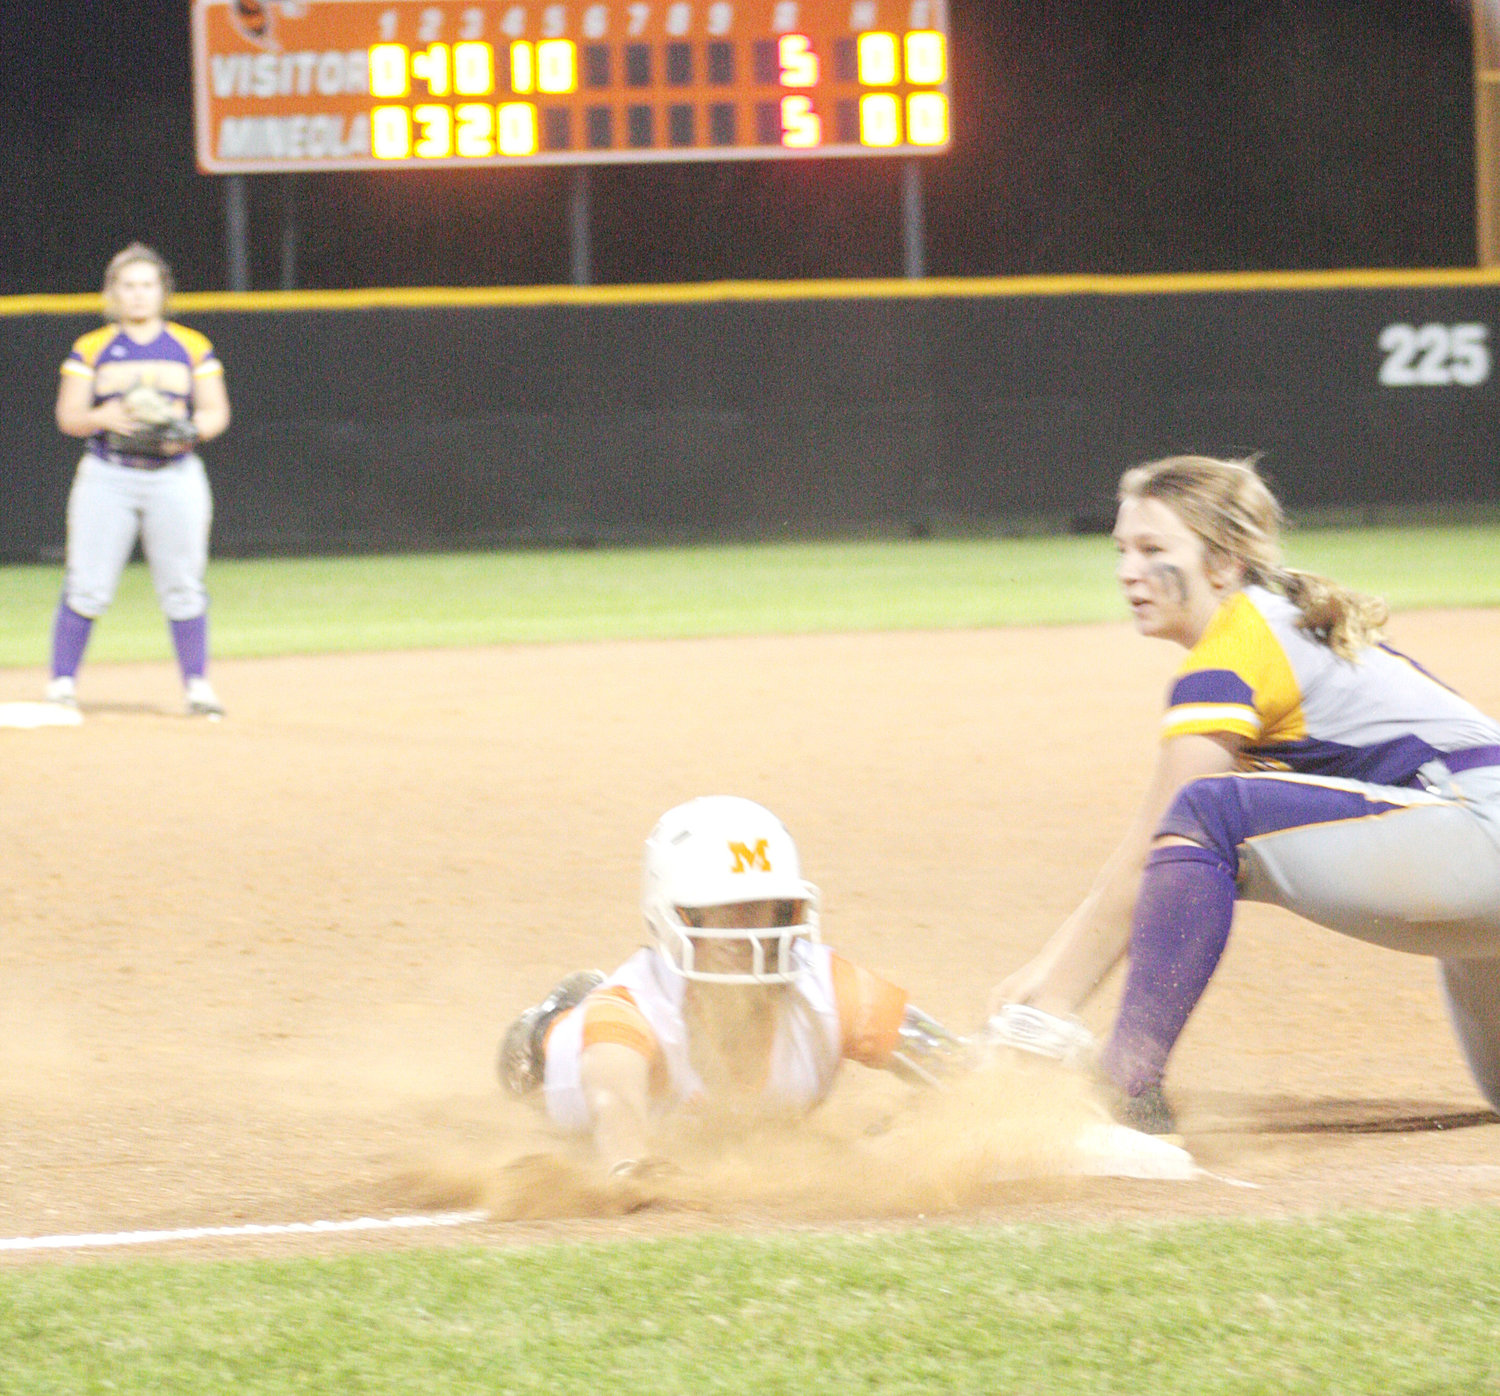 Abby Graves comes sliding head first in a cloud of dust to third base in the fifth inning Friday night in a District 12-3A game against Edgewood. Graves scored a short time later to put Mineola ahead to stay as the Lady Jackets defeated Edgewood, 8-7, in a crucial league game. (Monitor photo by Tommy Anderson)